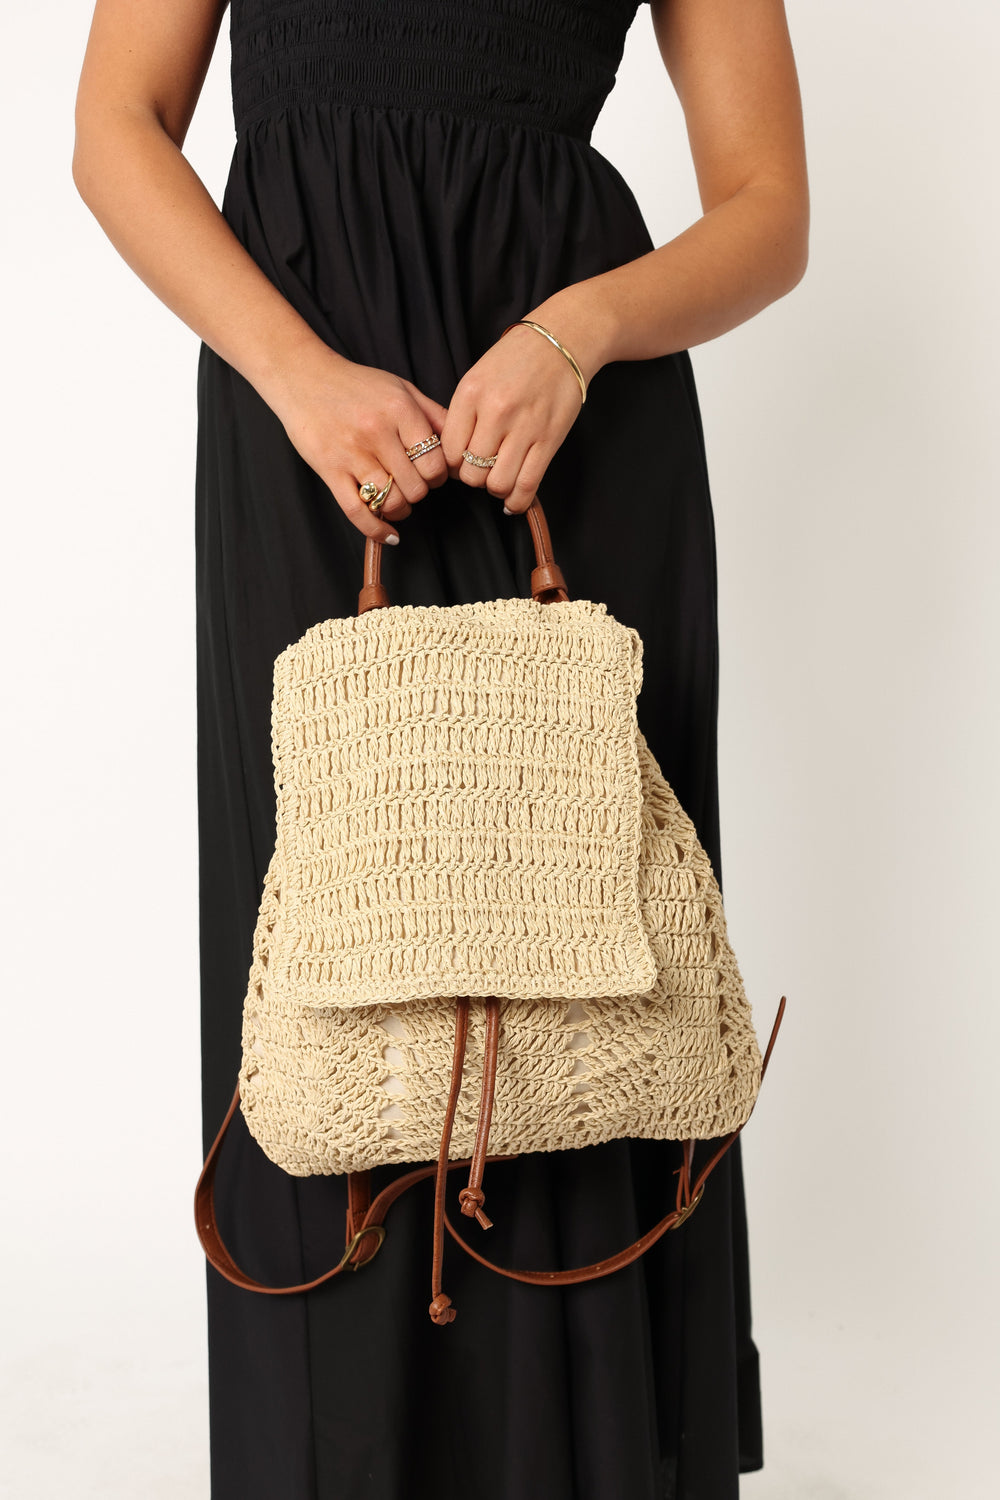 ACCESSORIES @Diana Backpack - Natural